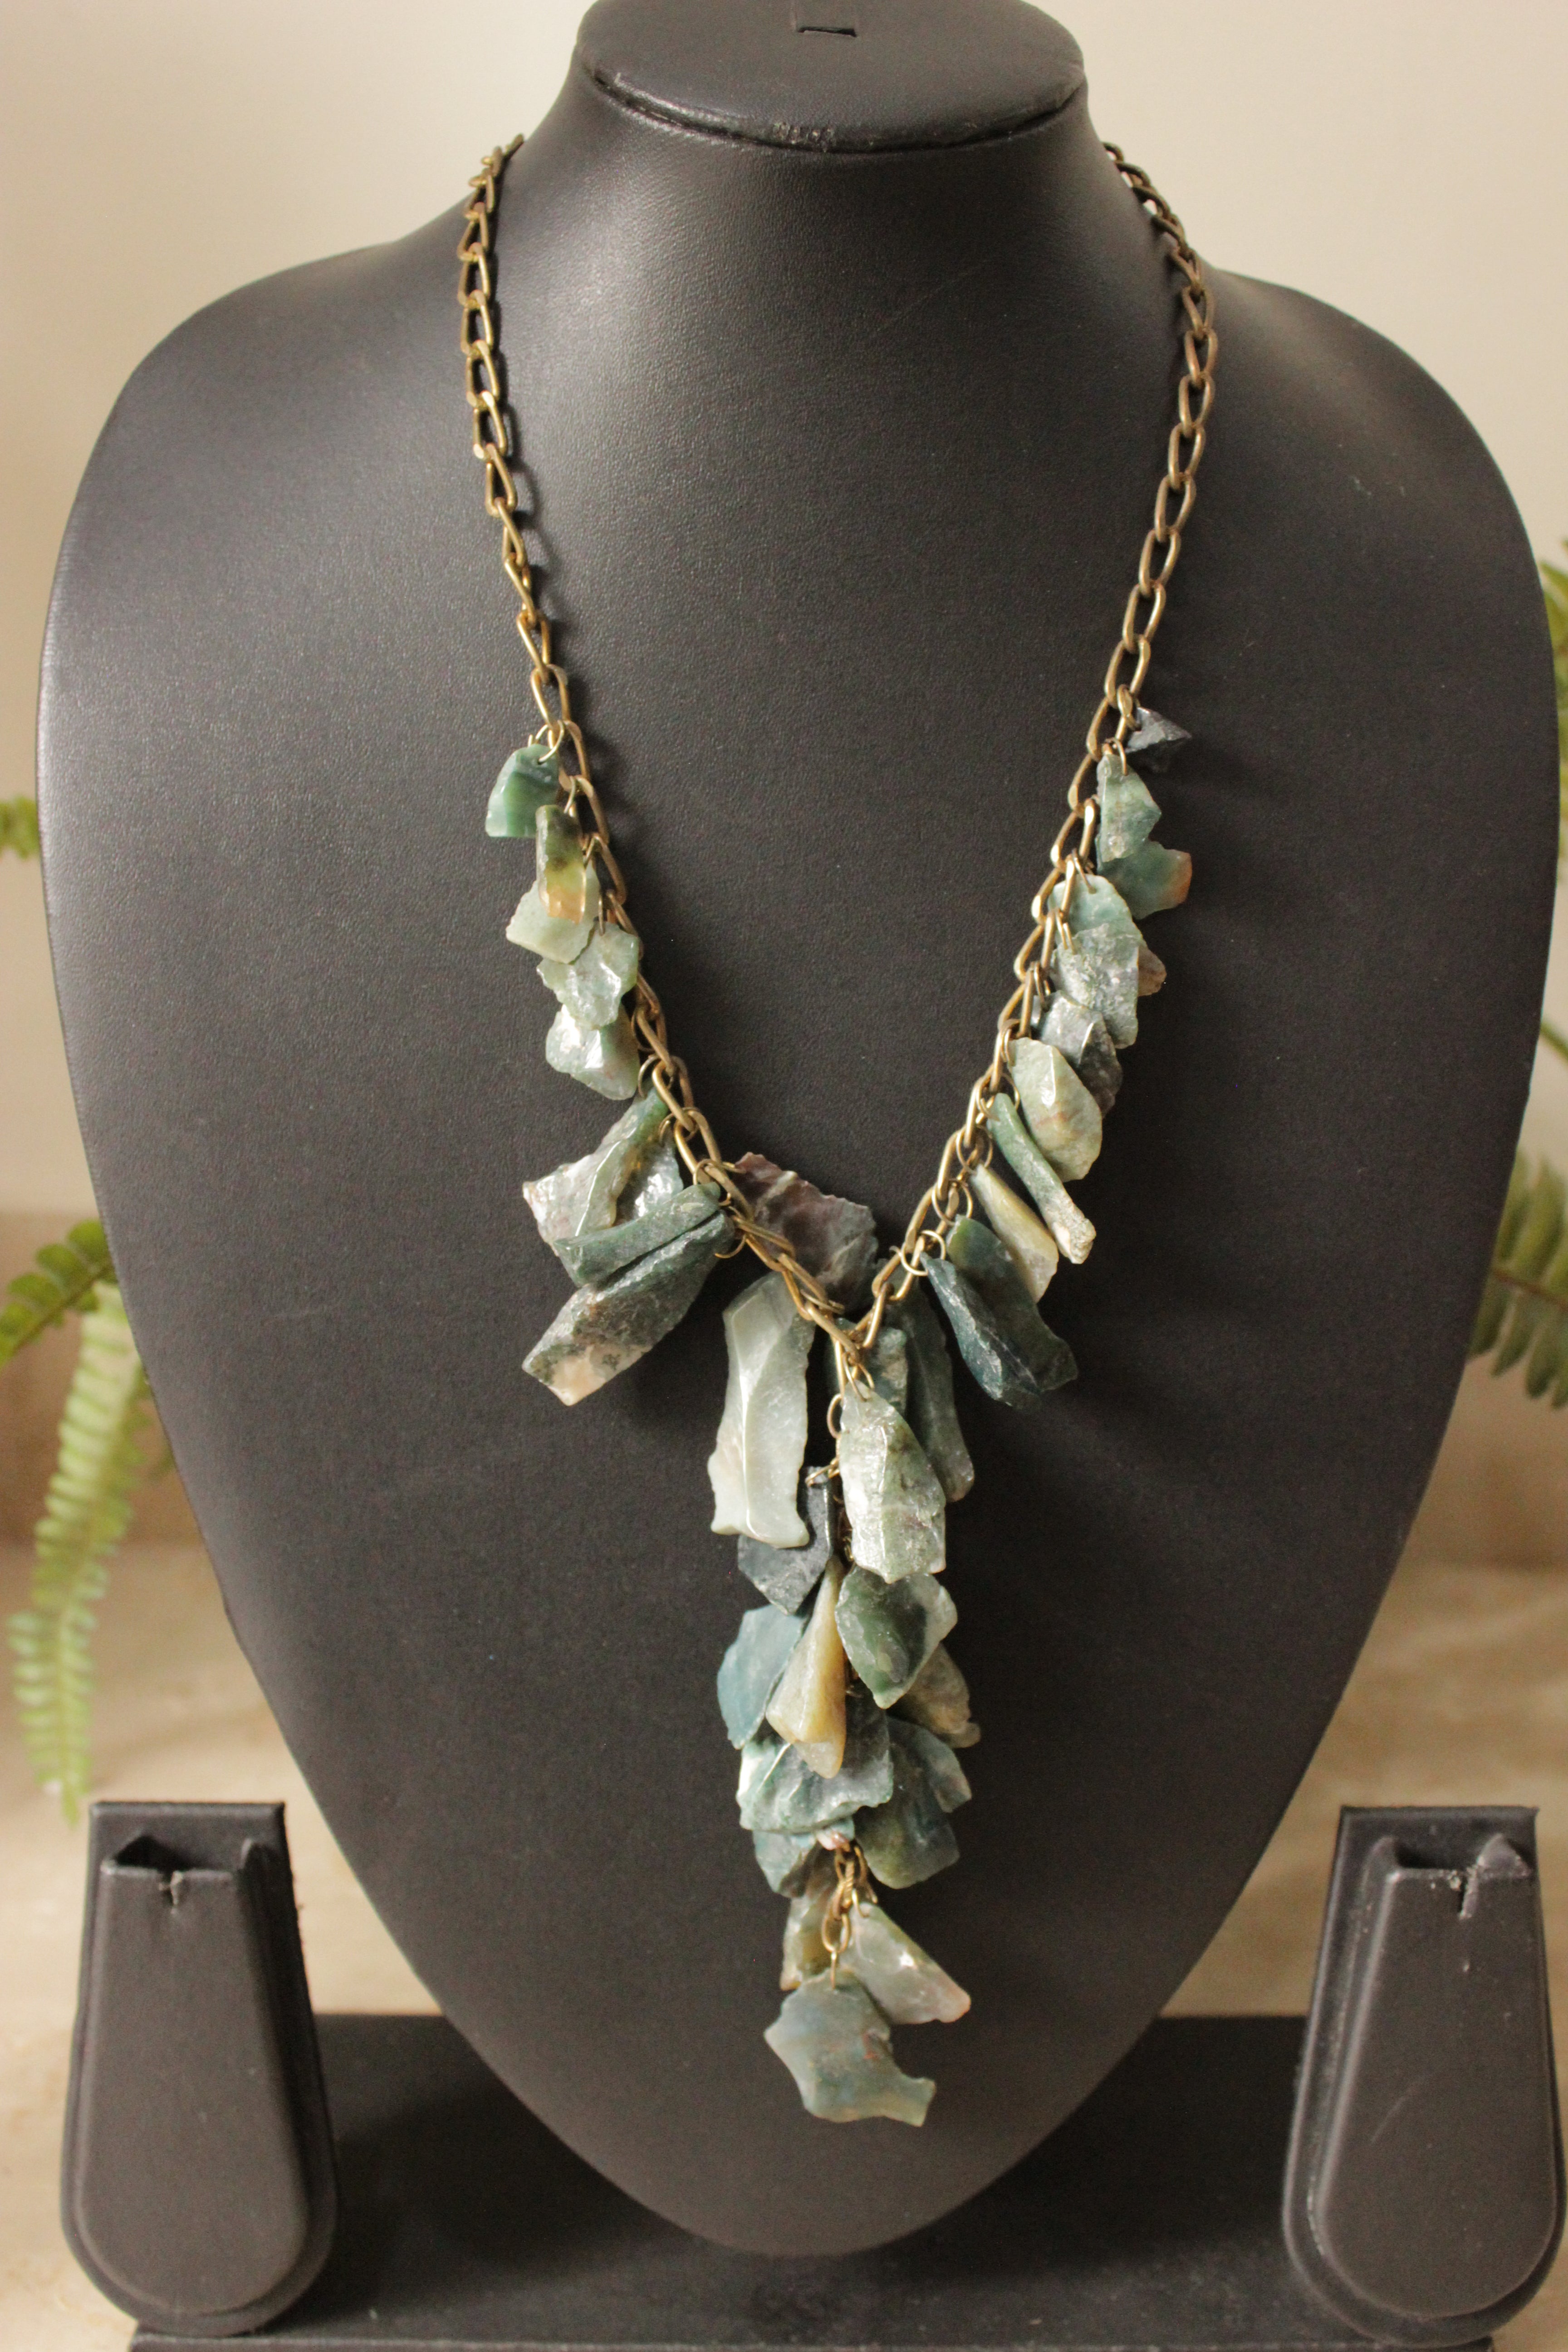 Shades of Blue Stones Braided in Golden Chain Necklace